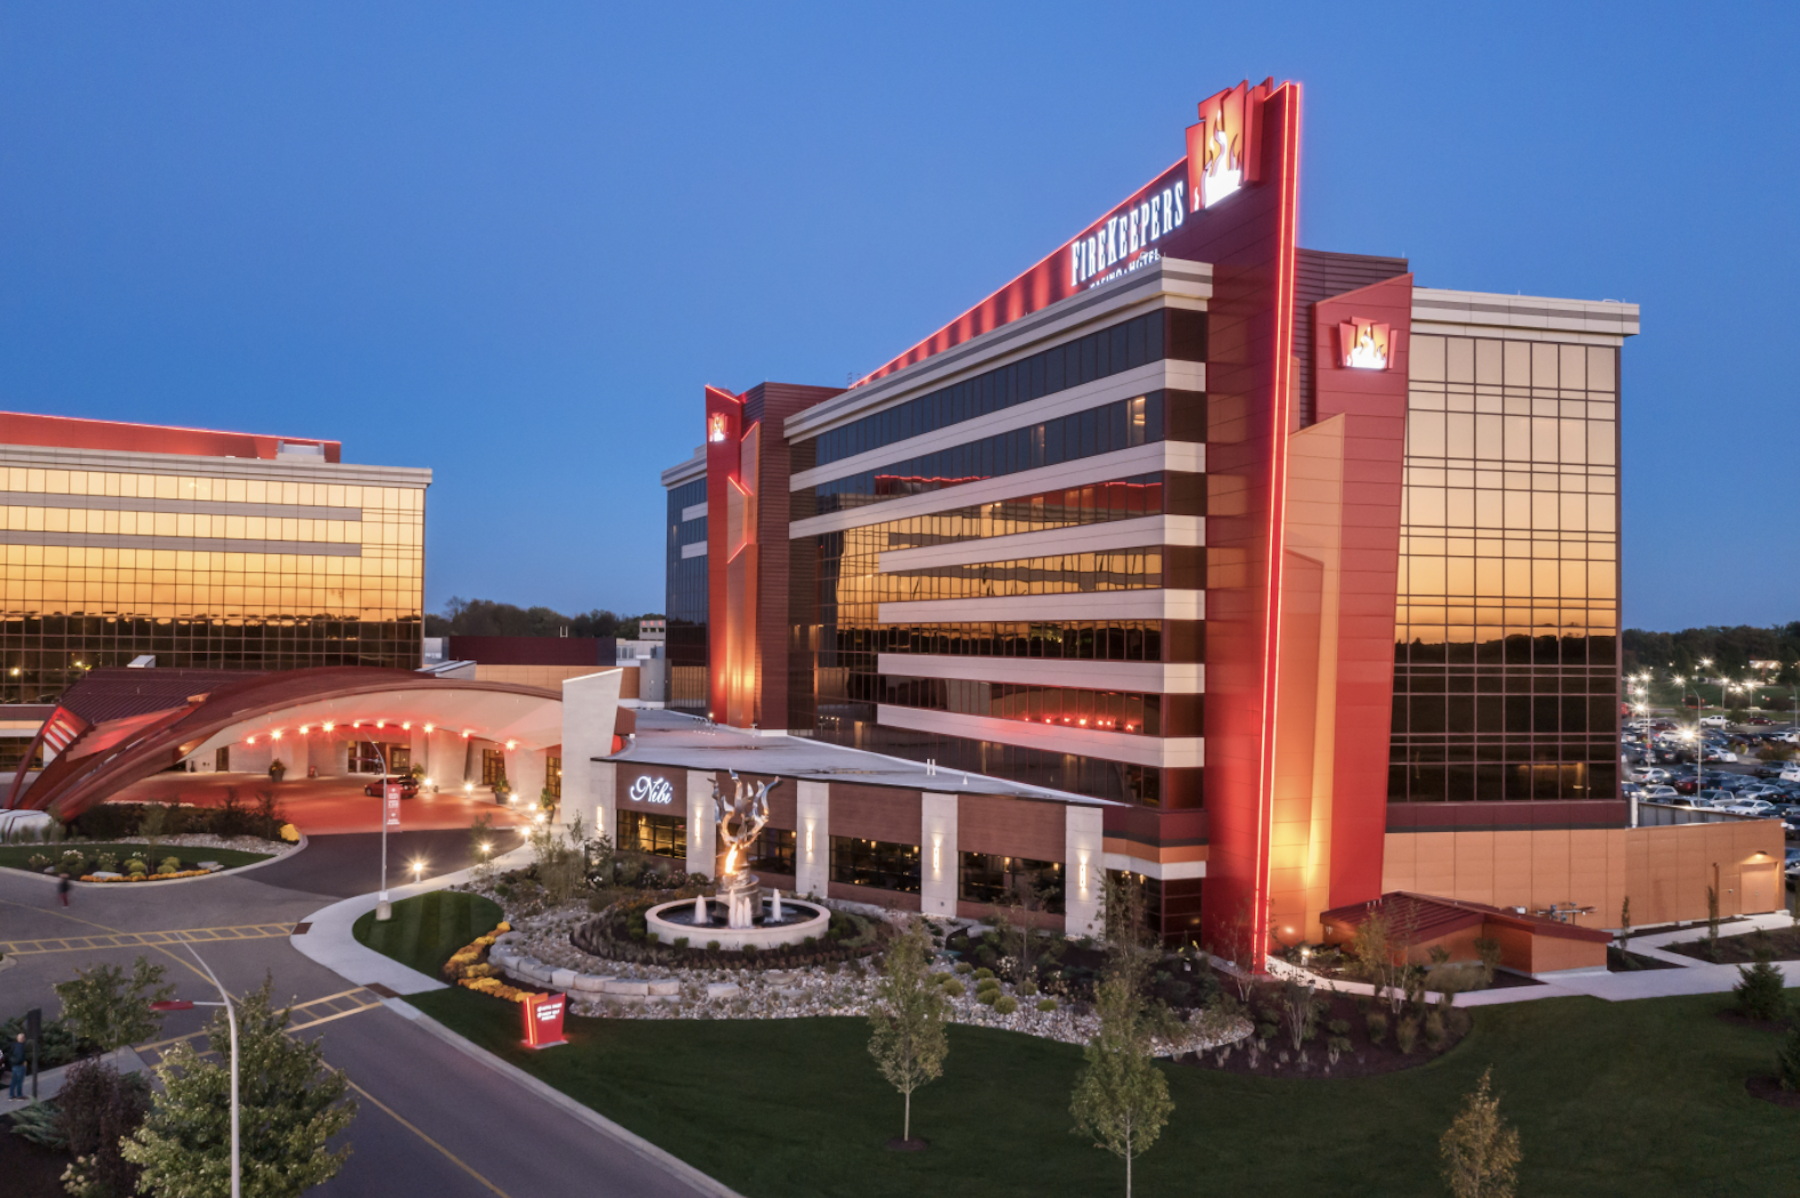 Top Casino Architects for 2022 FireKeepers Casino Hotel Expansion, Battle Creek, Mich., designed by JCJ Architecture